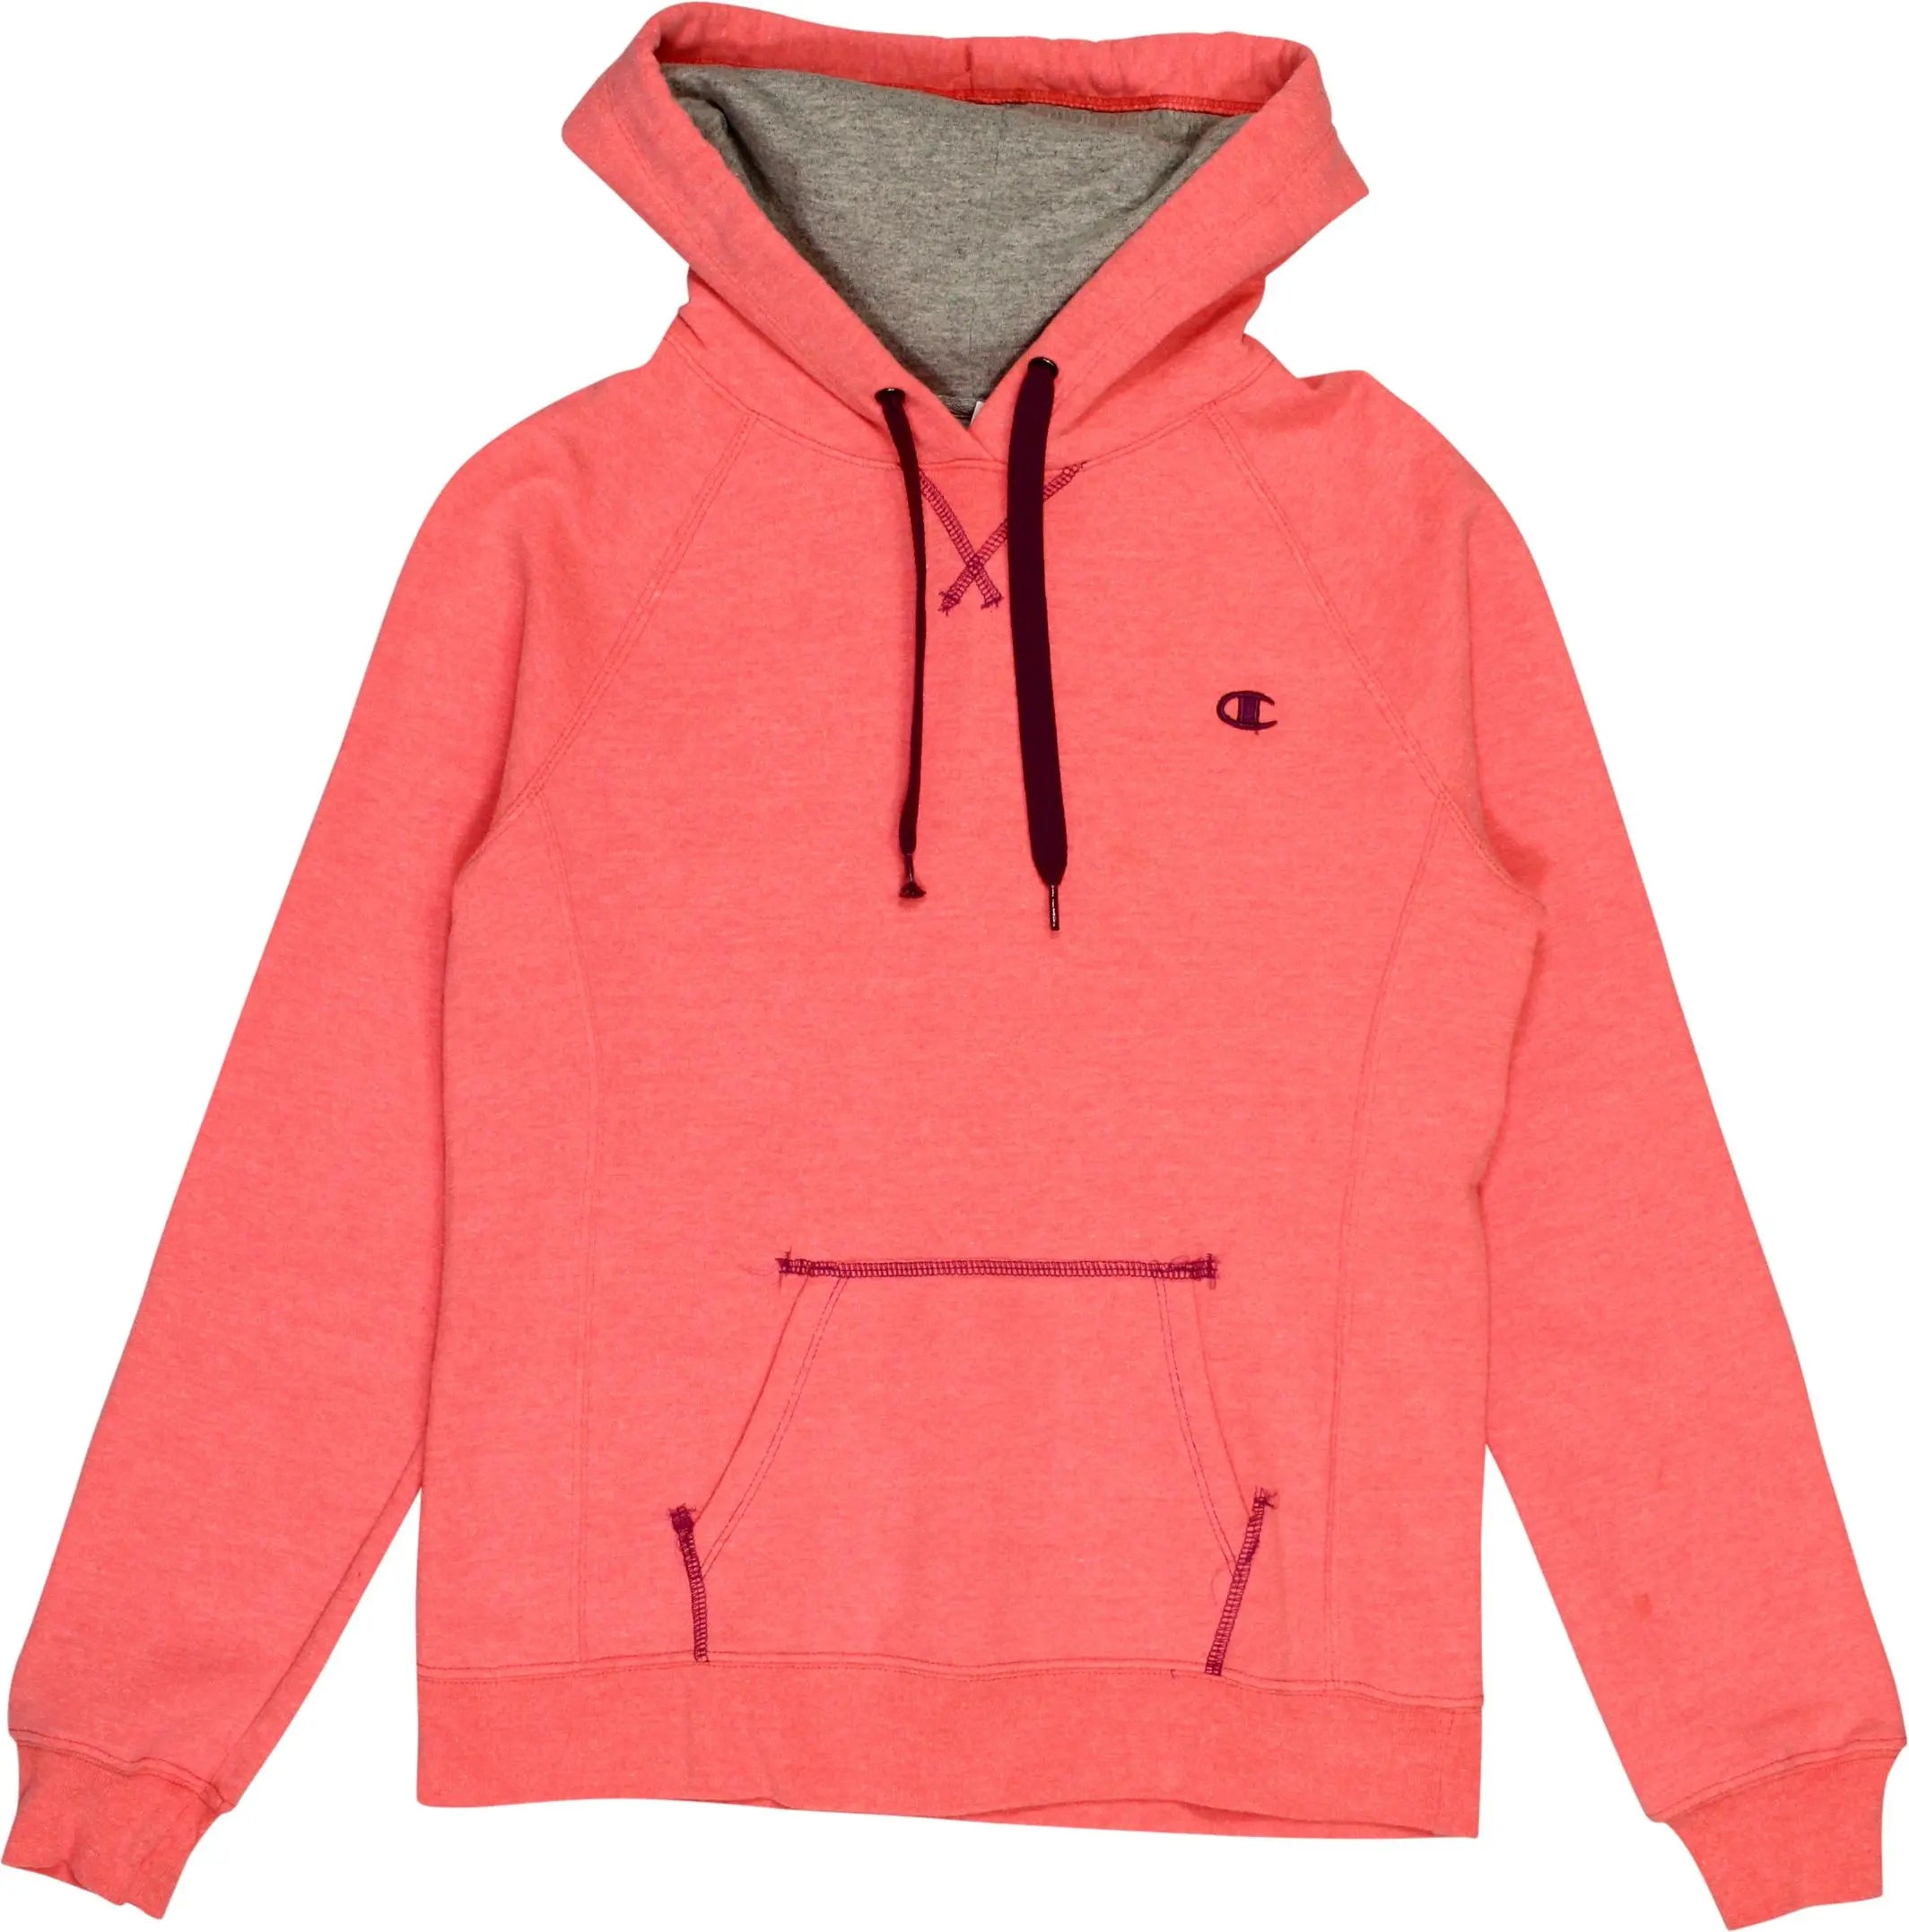 Champion - Neon pink Champion hoodie- ThriftTale.com - Vintage and second handclothing